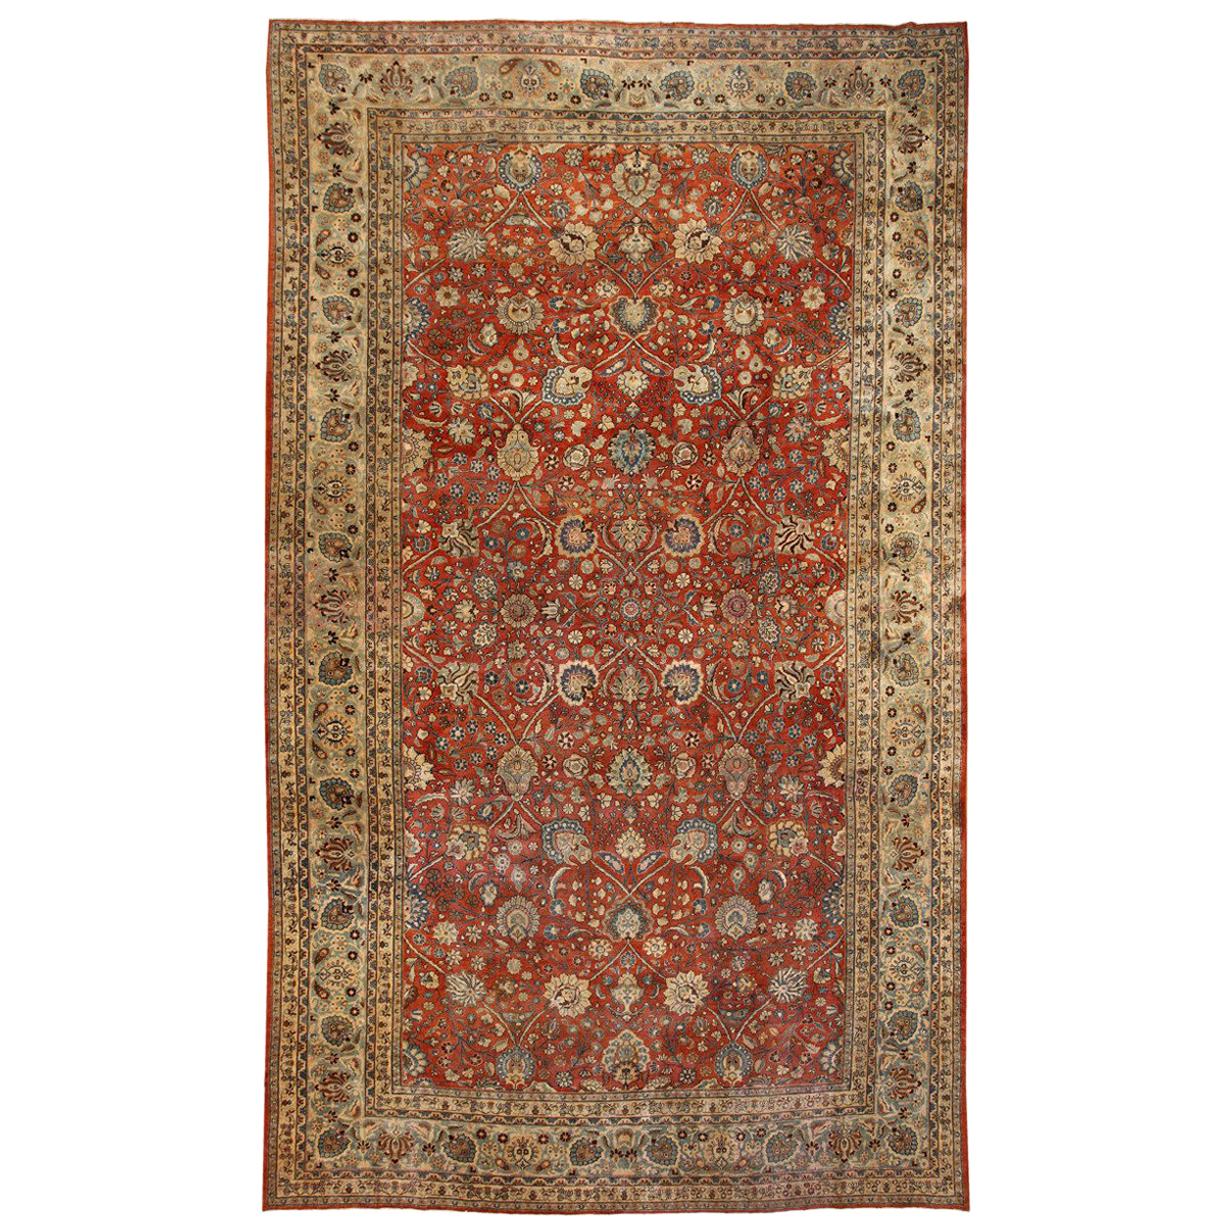 Antique Tabriz Persian Carpet. Size: 11 ft 2 in x 18 ft 6 in For Sale